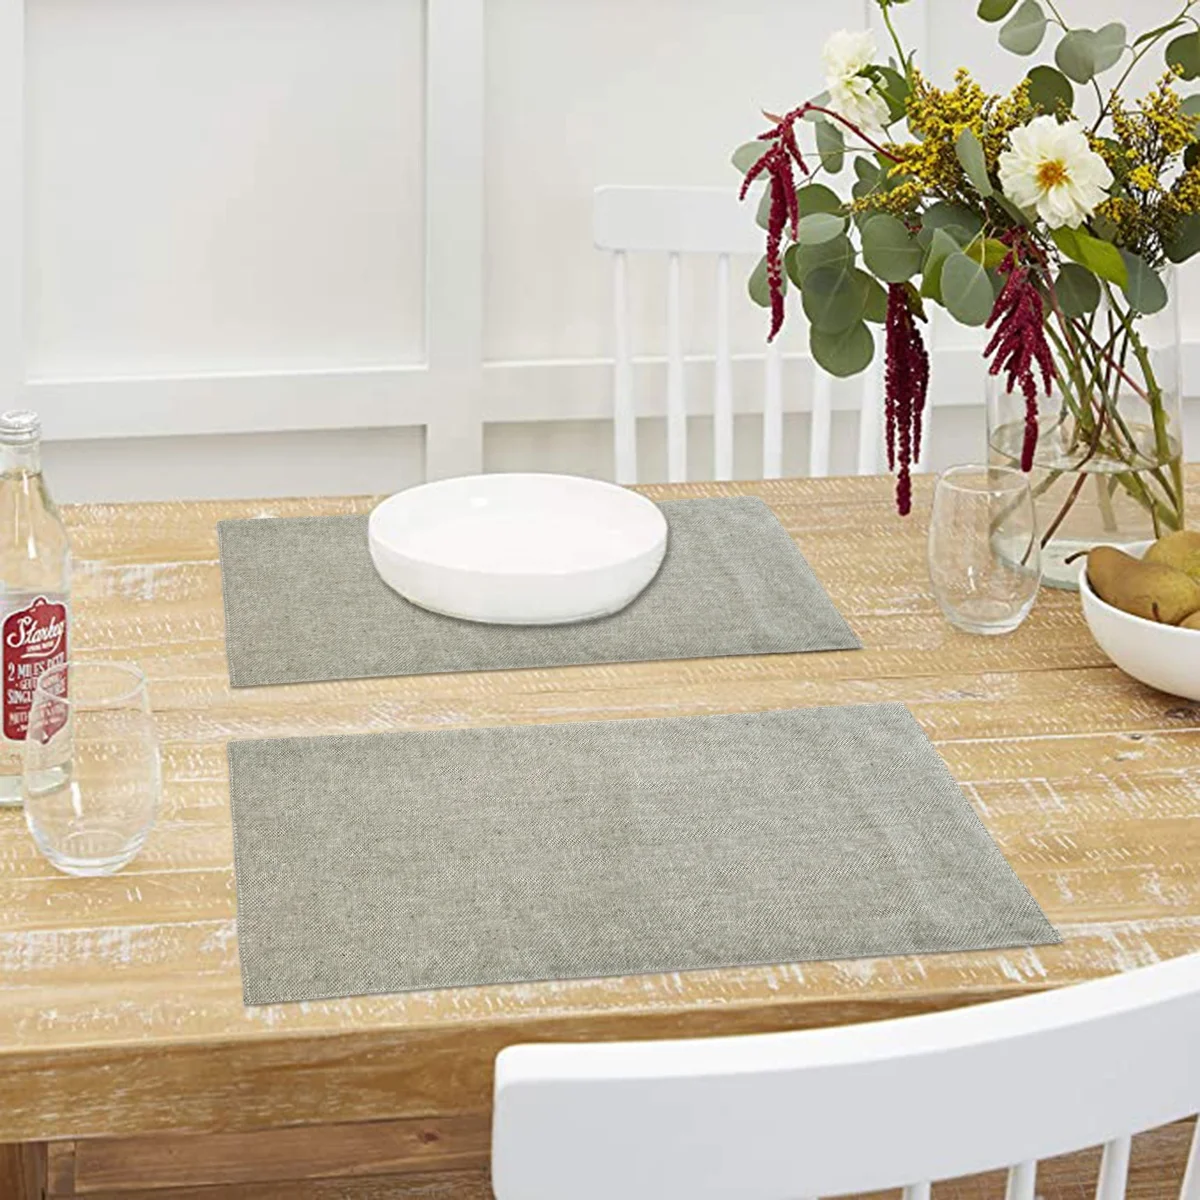 Yarn Dyed Plain Place Mat Tea Towel Cleaning Antifuling Table and Kitchen Tea Towels